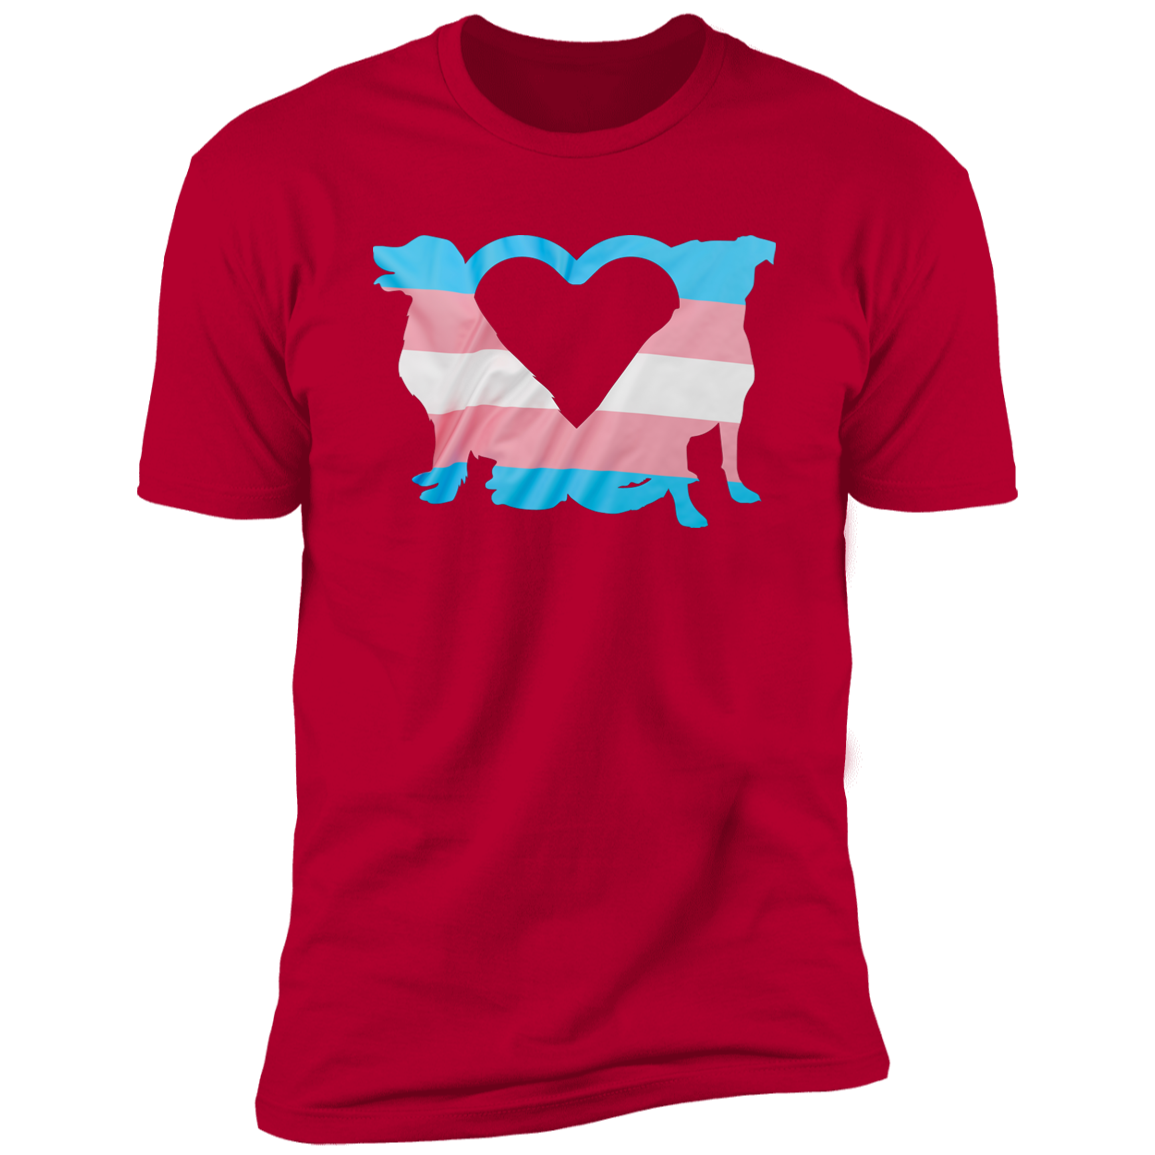 Trans Pride Dogs Heart Pride T-shirt, Trans Pride Dog Shirt for humans, in red